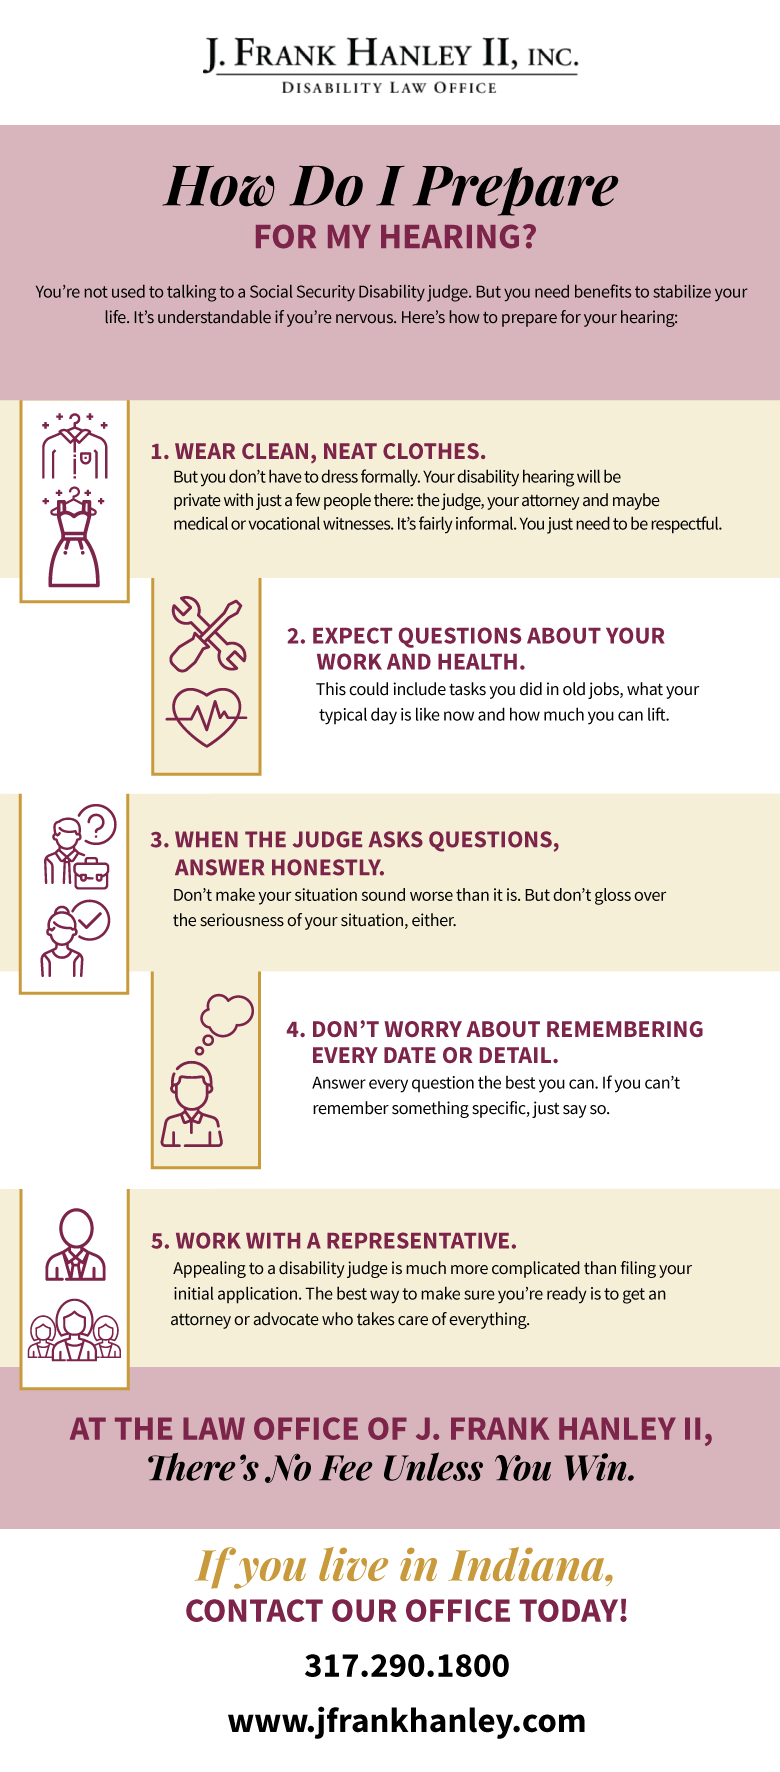 An infographic on how to prepare for a disability hearing.